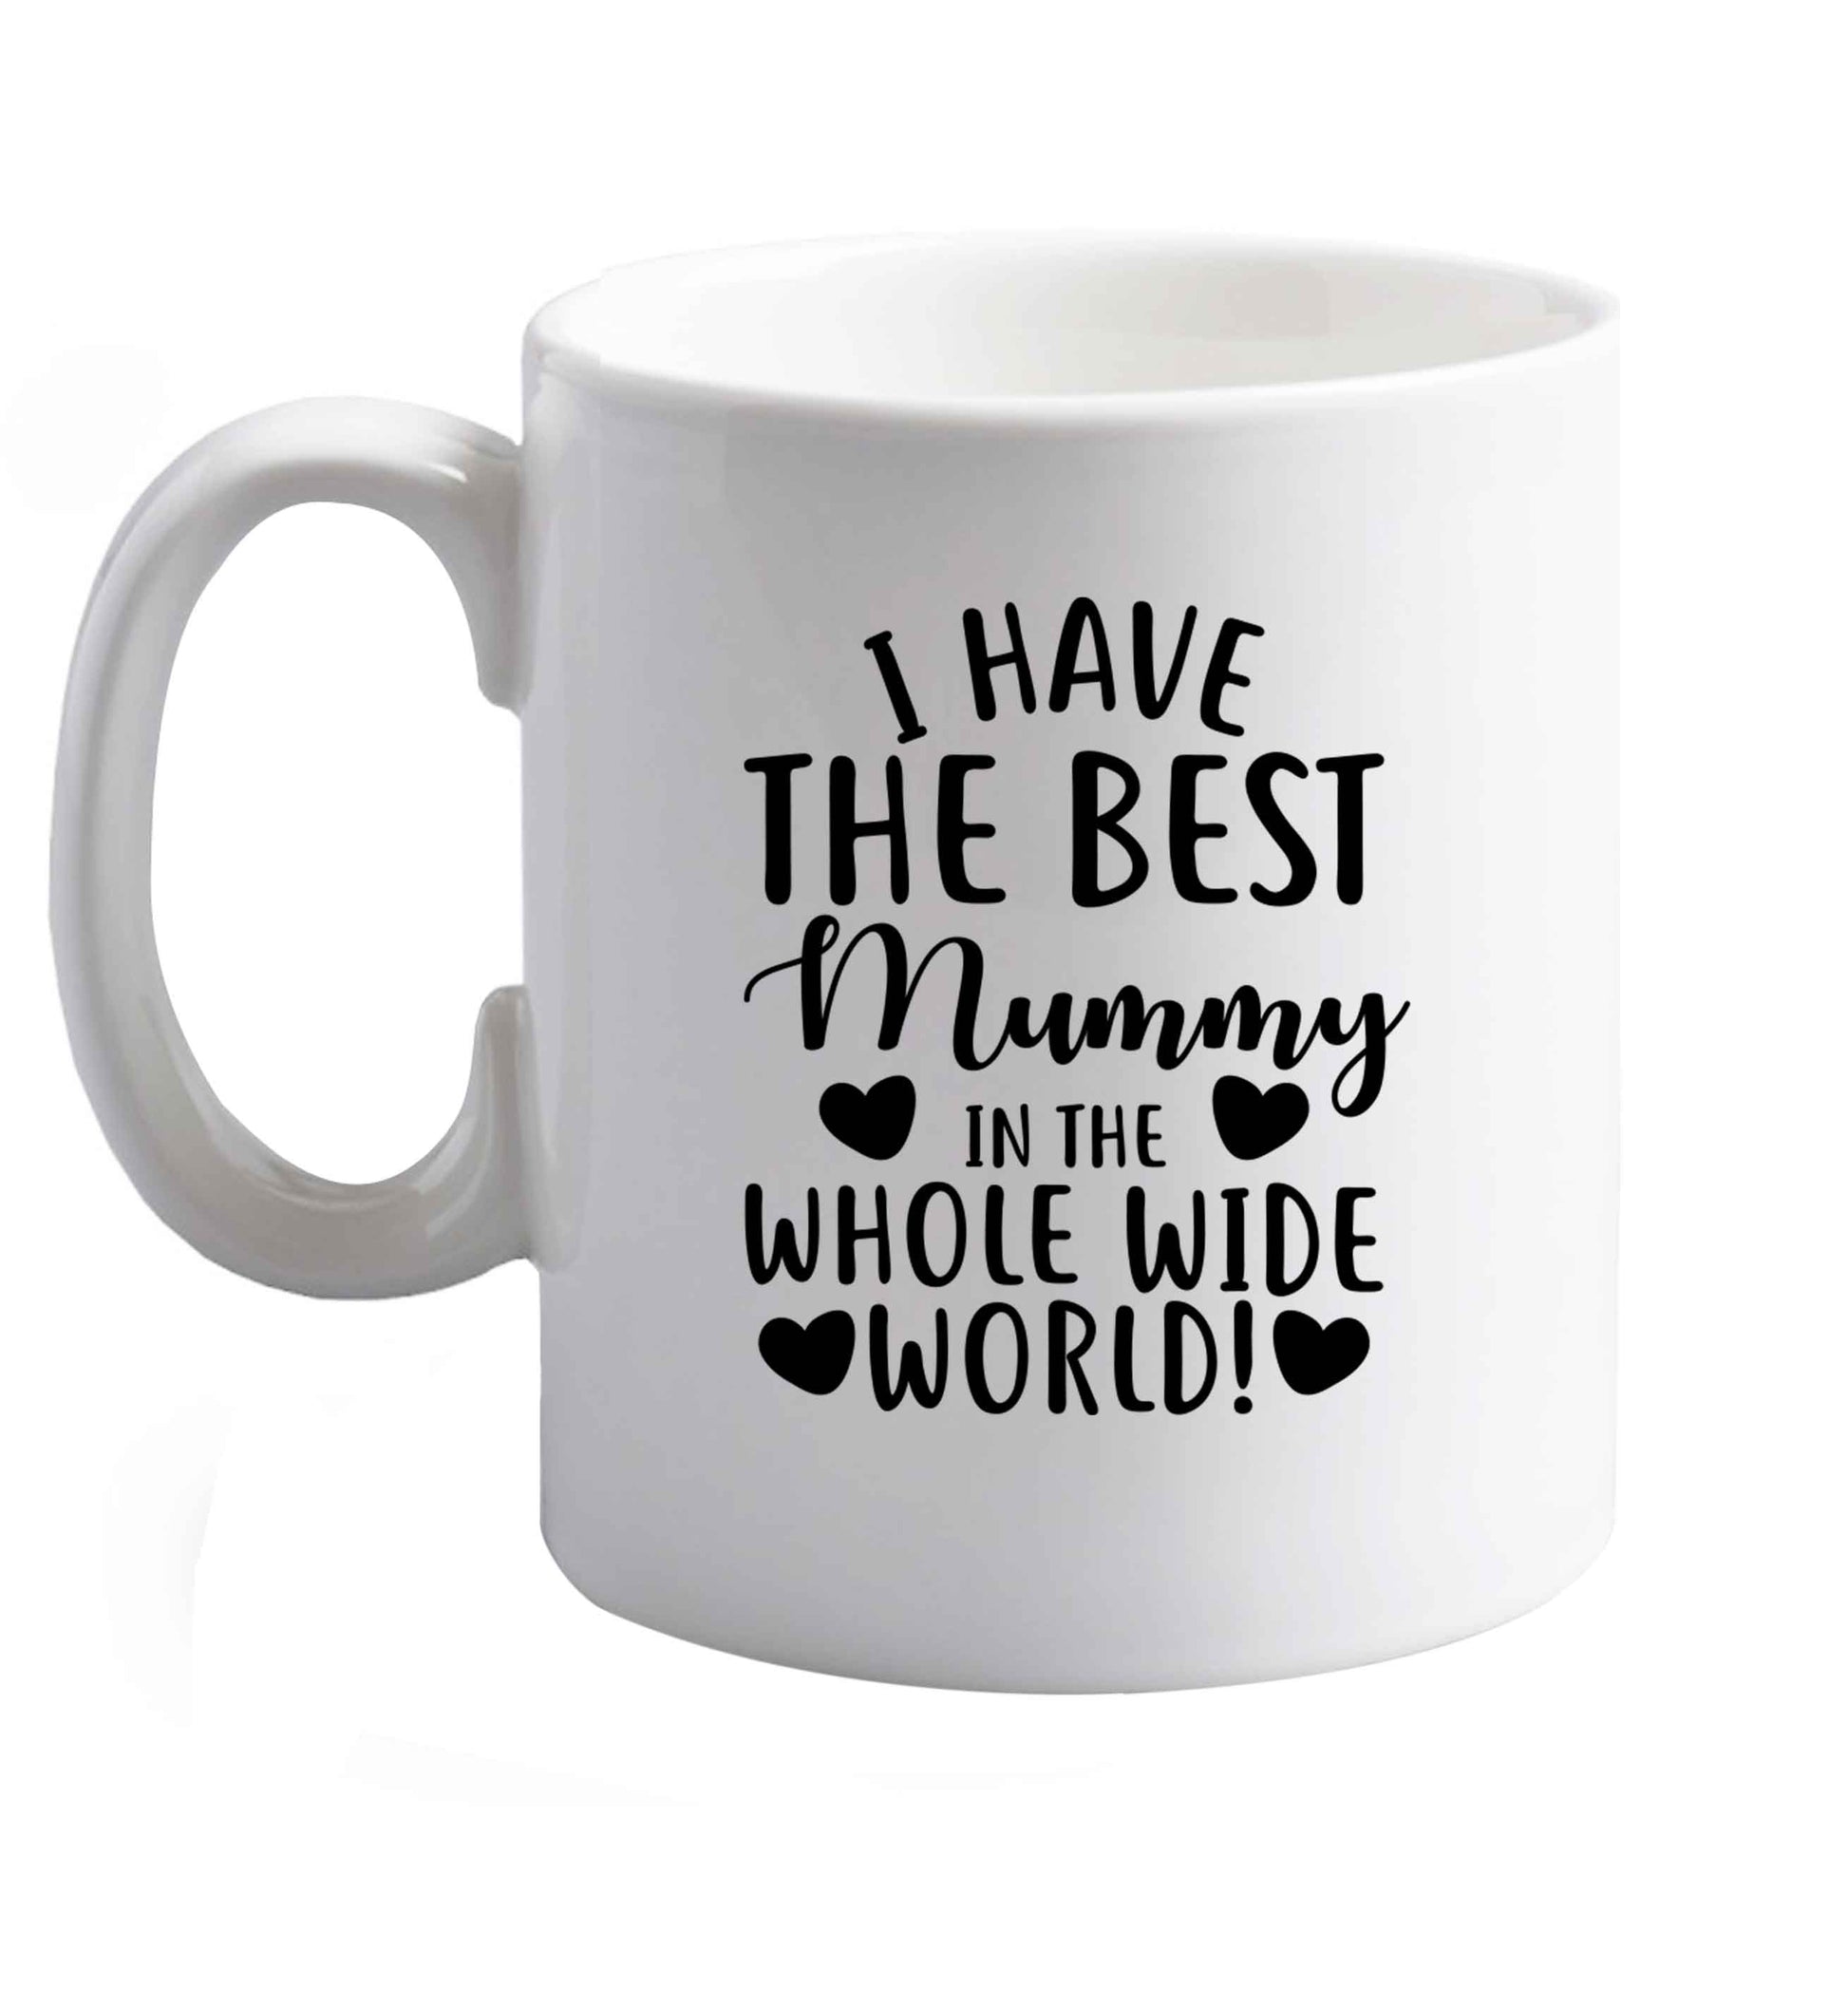 10 oz I have the best mummy in the whole wide world ceramic mug right handed